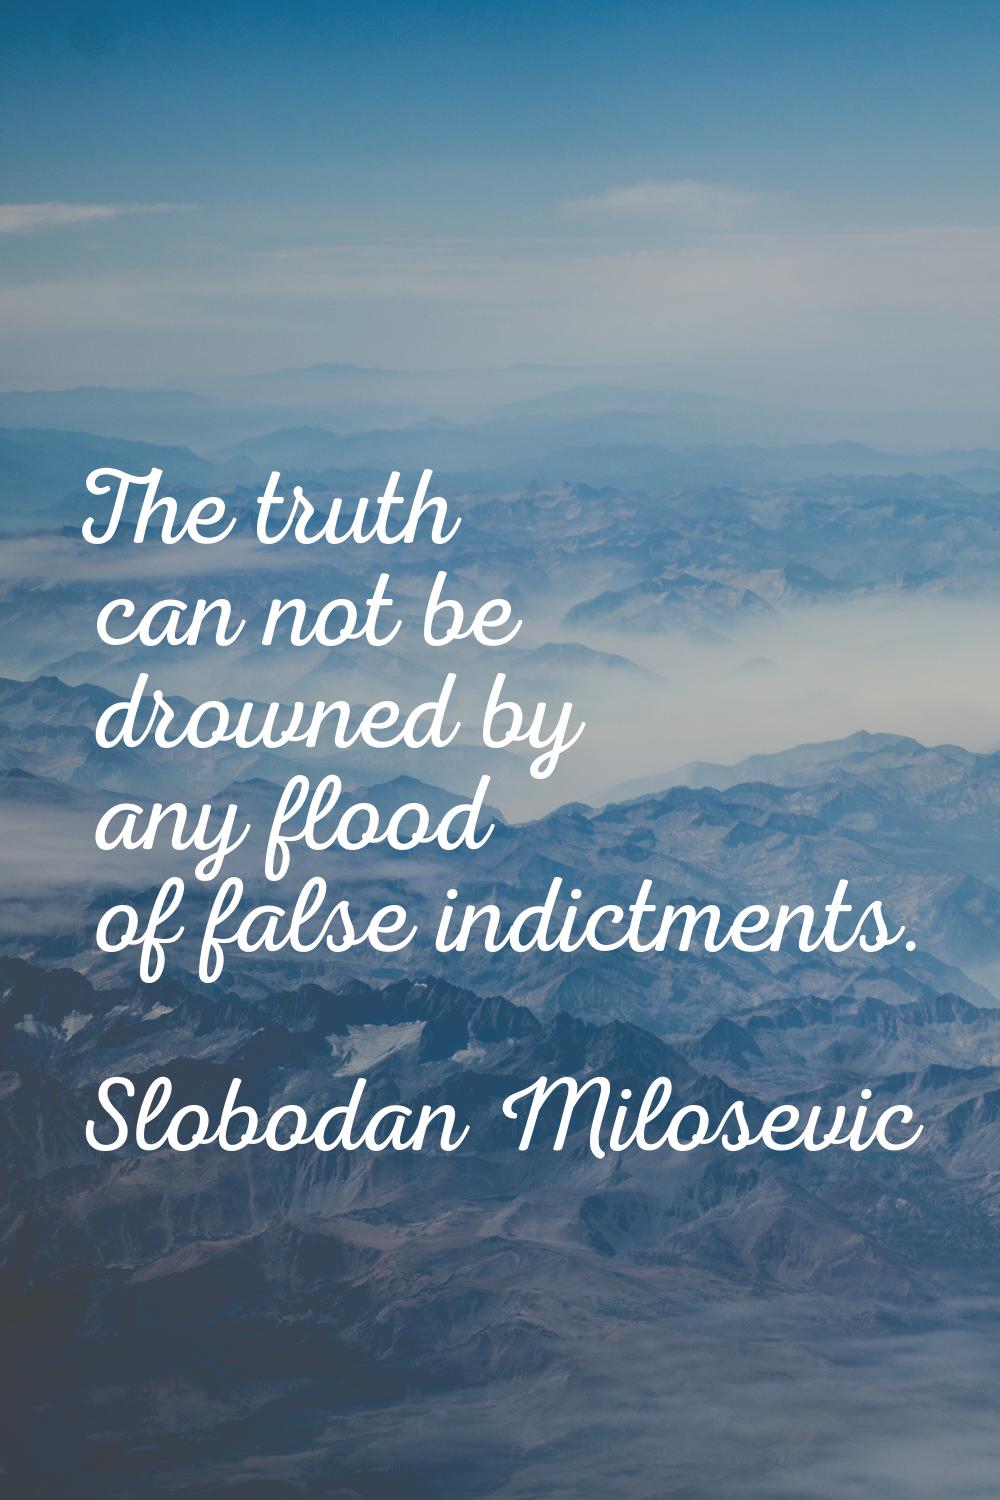 The truth can not be drowned by any flood of false indictments.